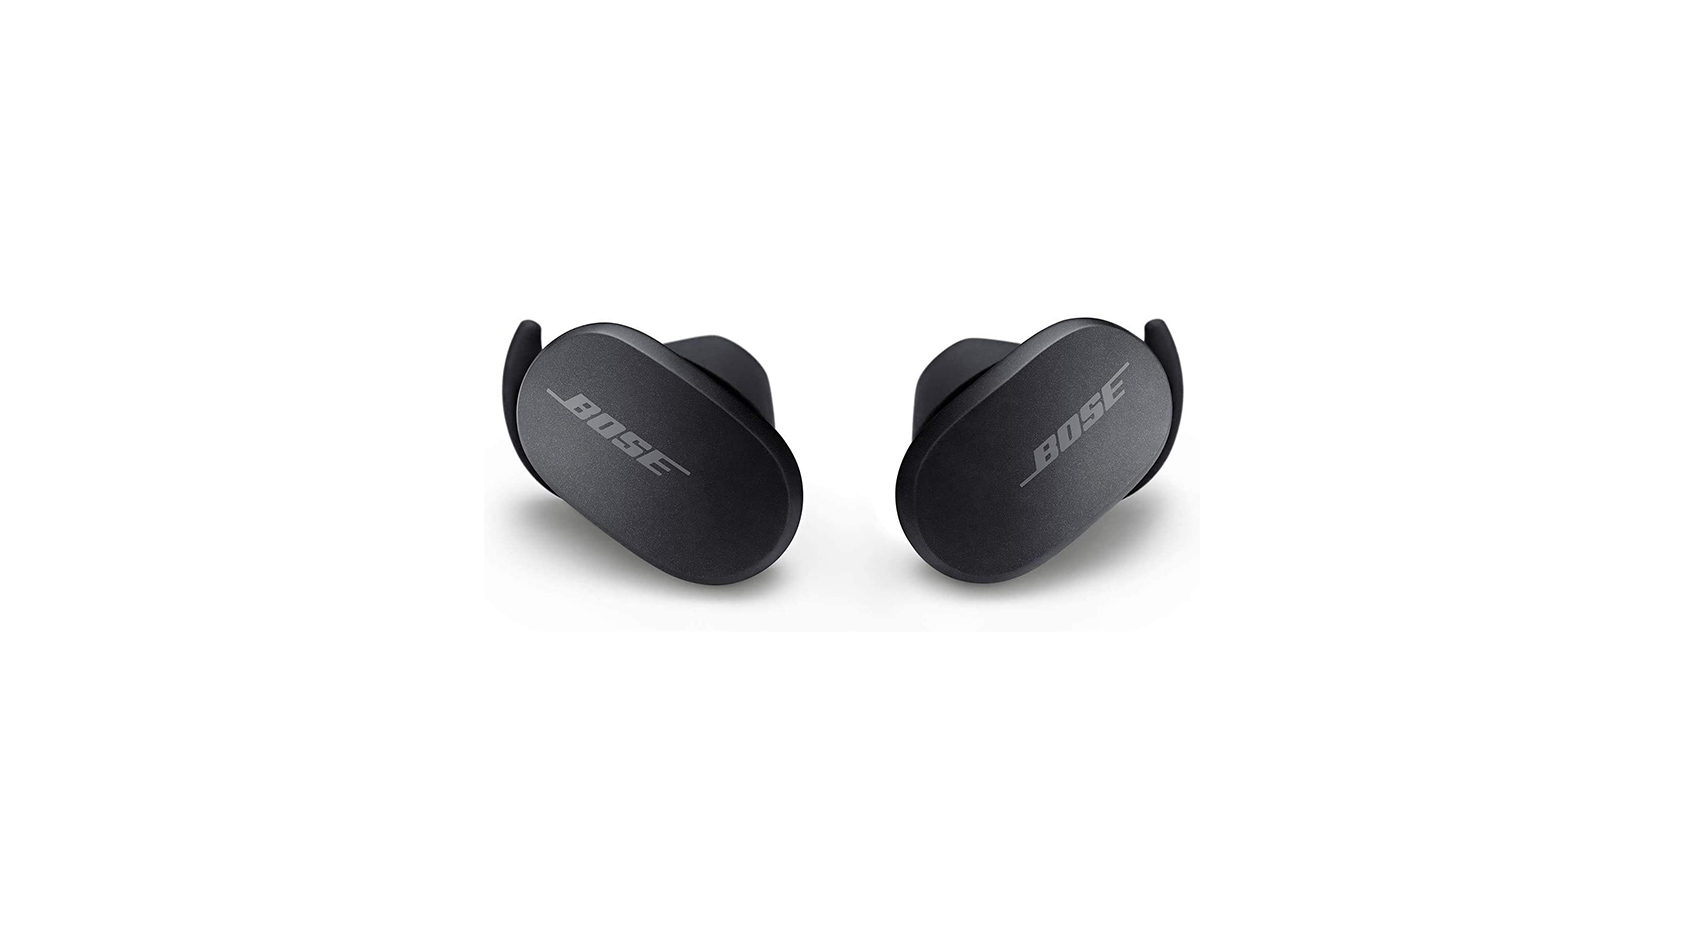 The Bose QuietComfort true wireless noise canceling earbuds in black against a white background.